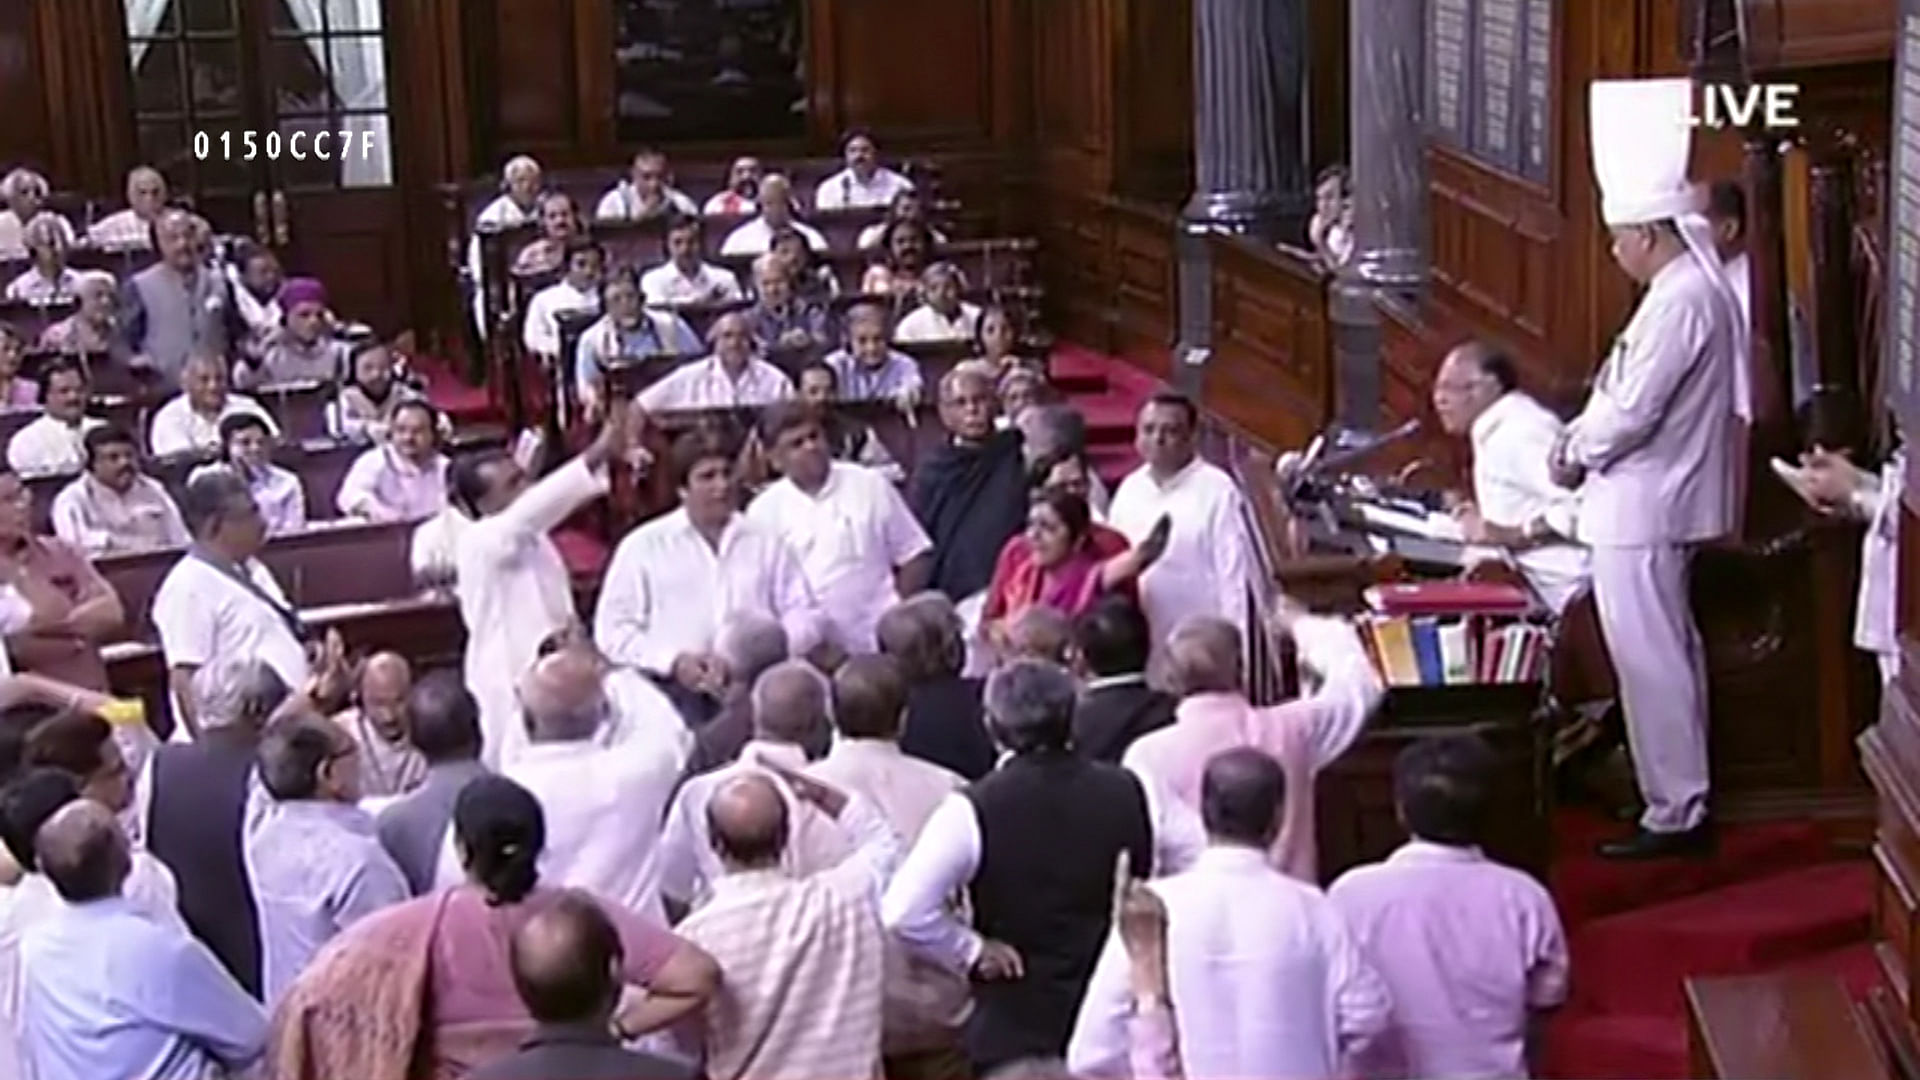 Disruption in the parliament after GST Bill was introduced. (Photo: RSTV Screengrab)